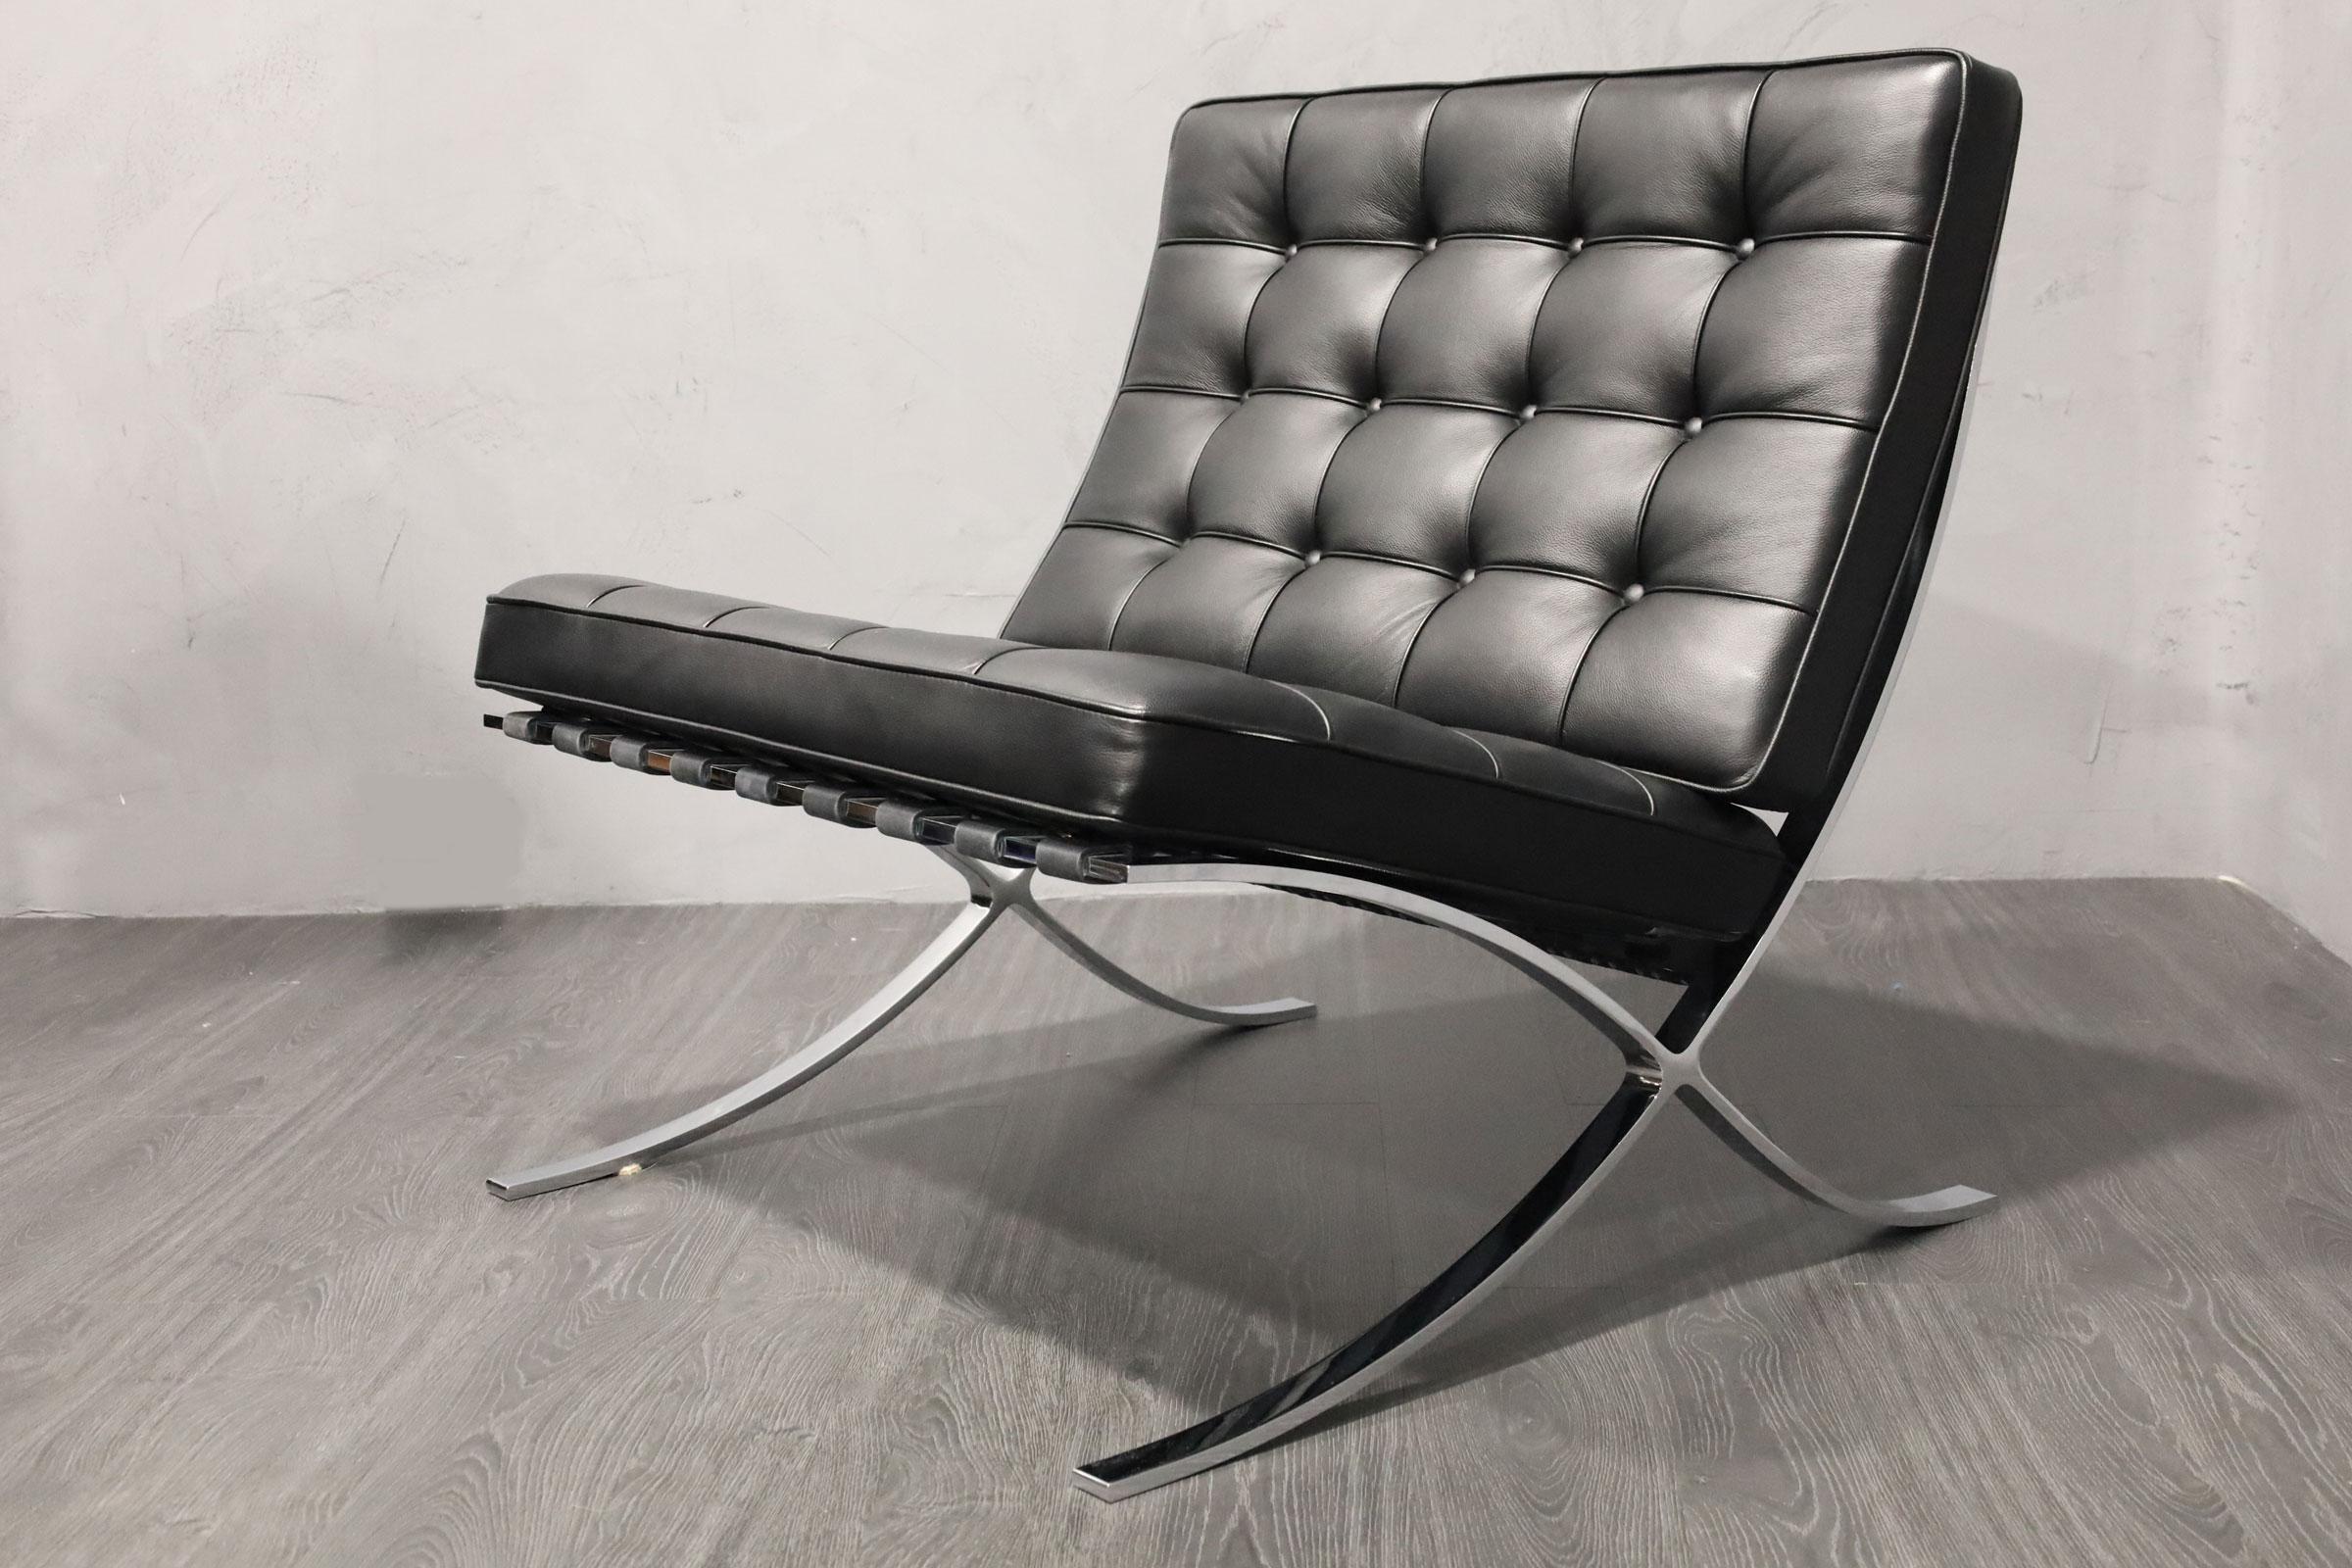 Mies van der Rohe's iconic Barcelona chair with stool. Stamped Knoll.